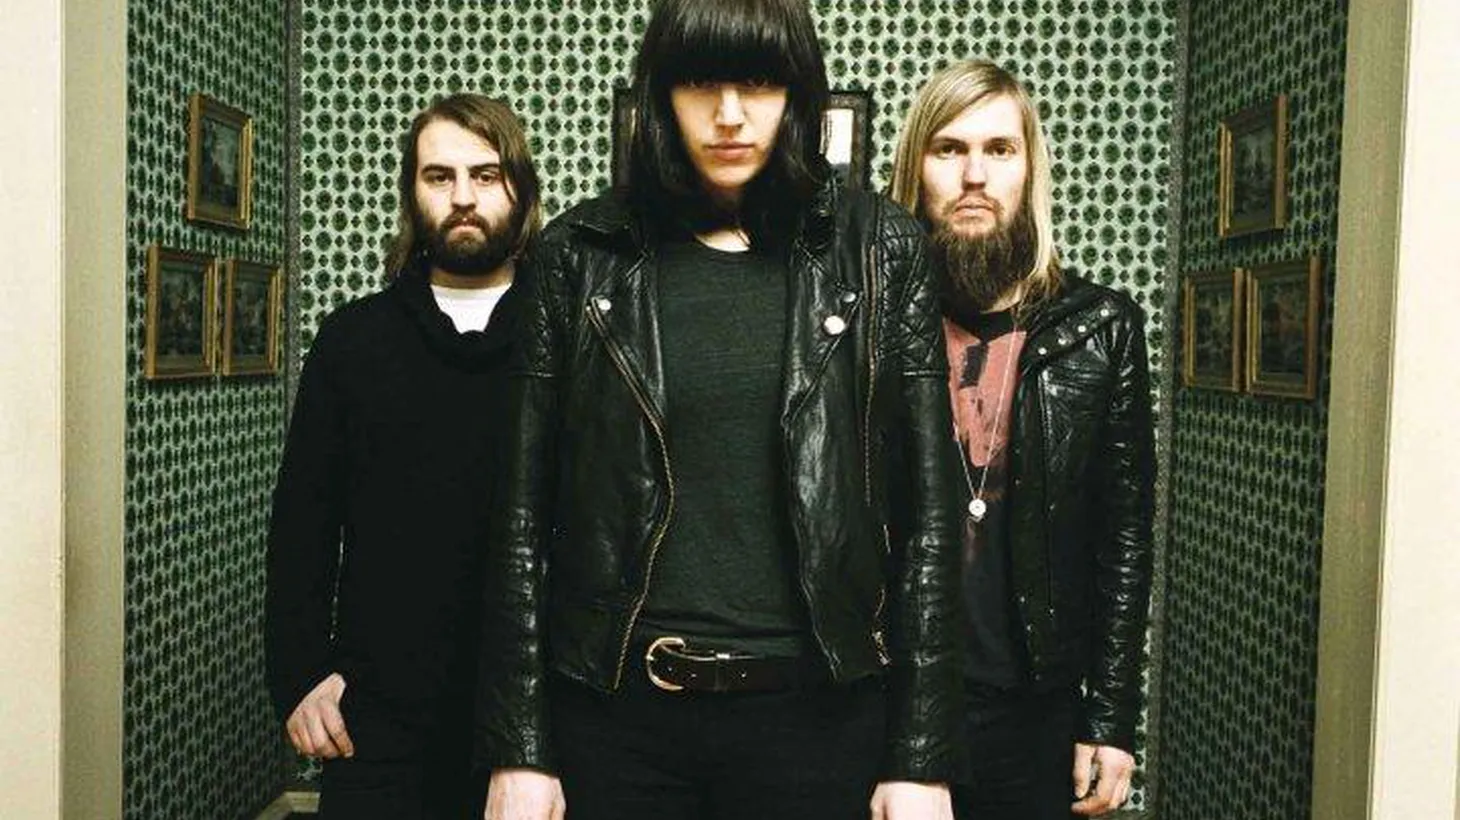 British trio Band of Skulls play pure rock 'n' roll. We hear it when they join us for a set on Morning Becomes Eclectic.